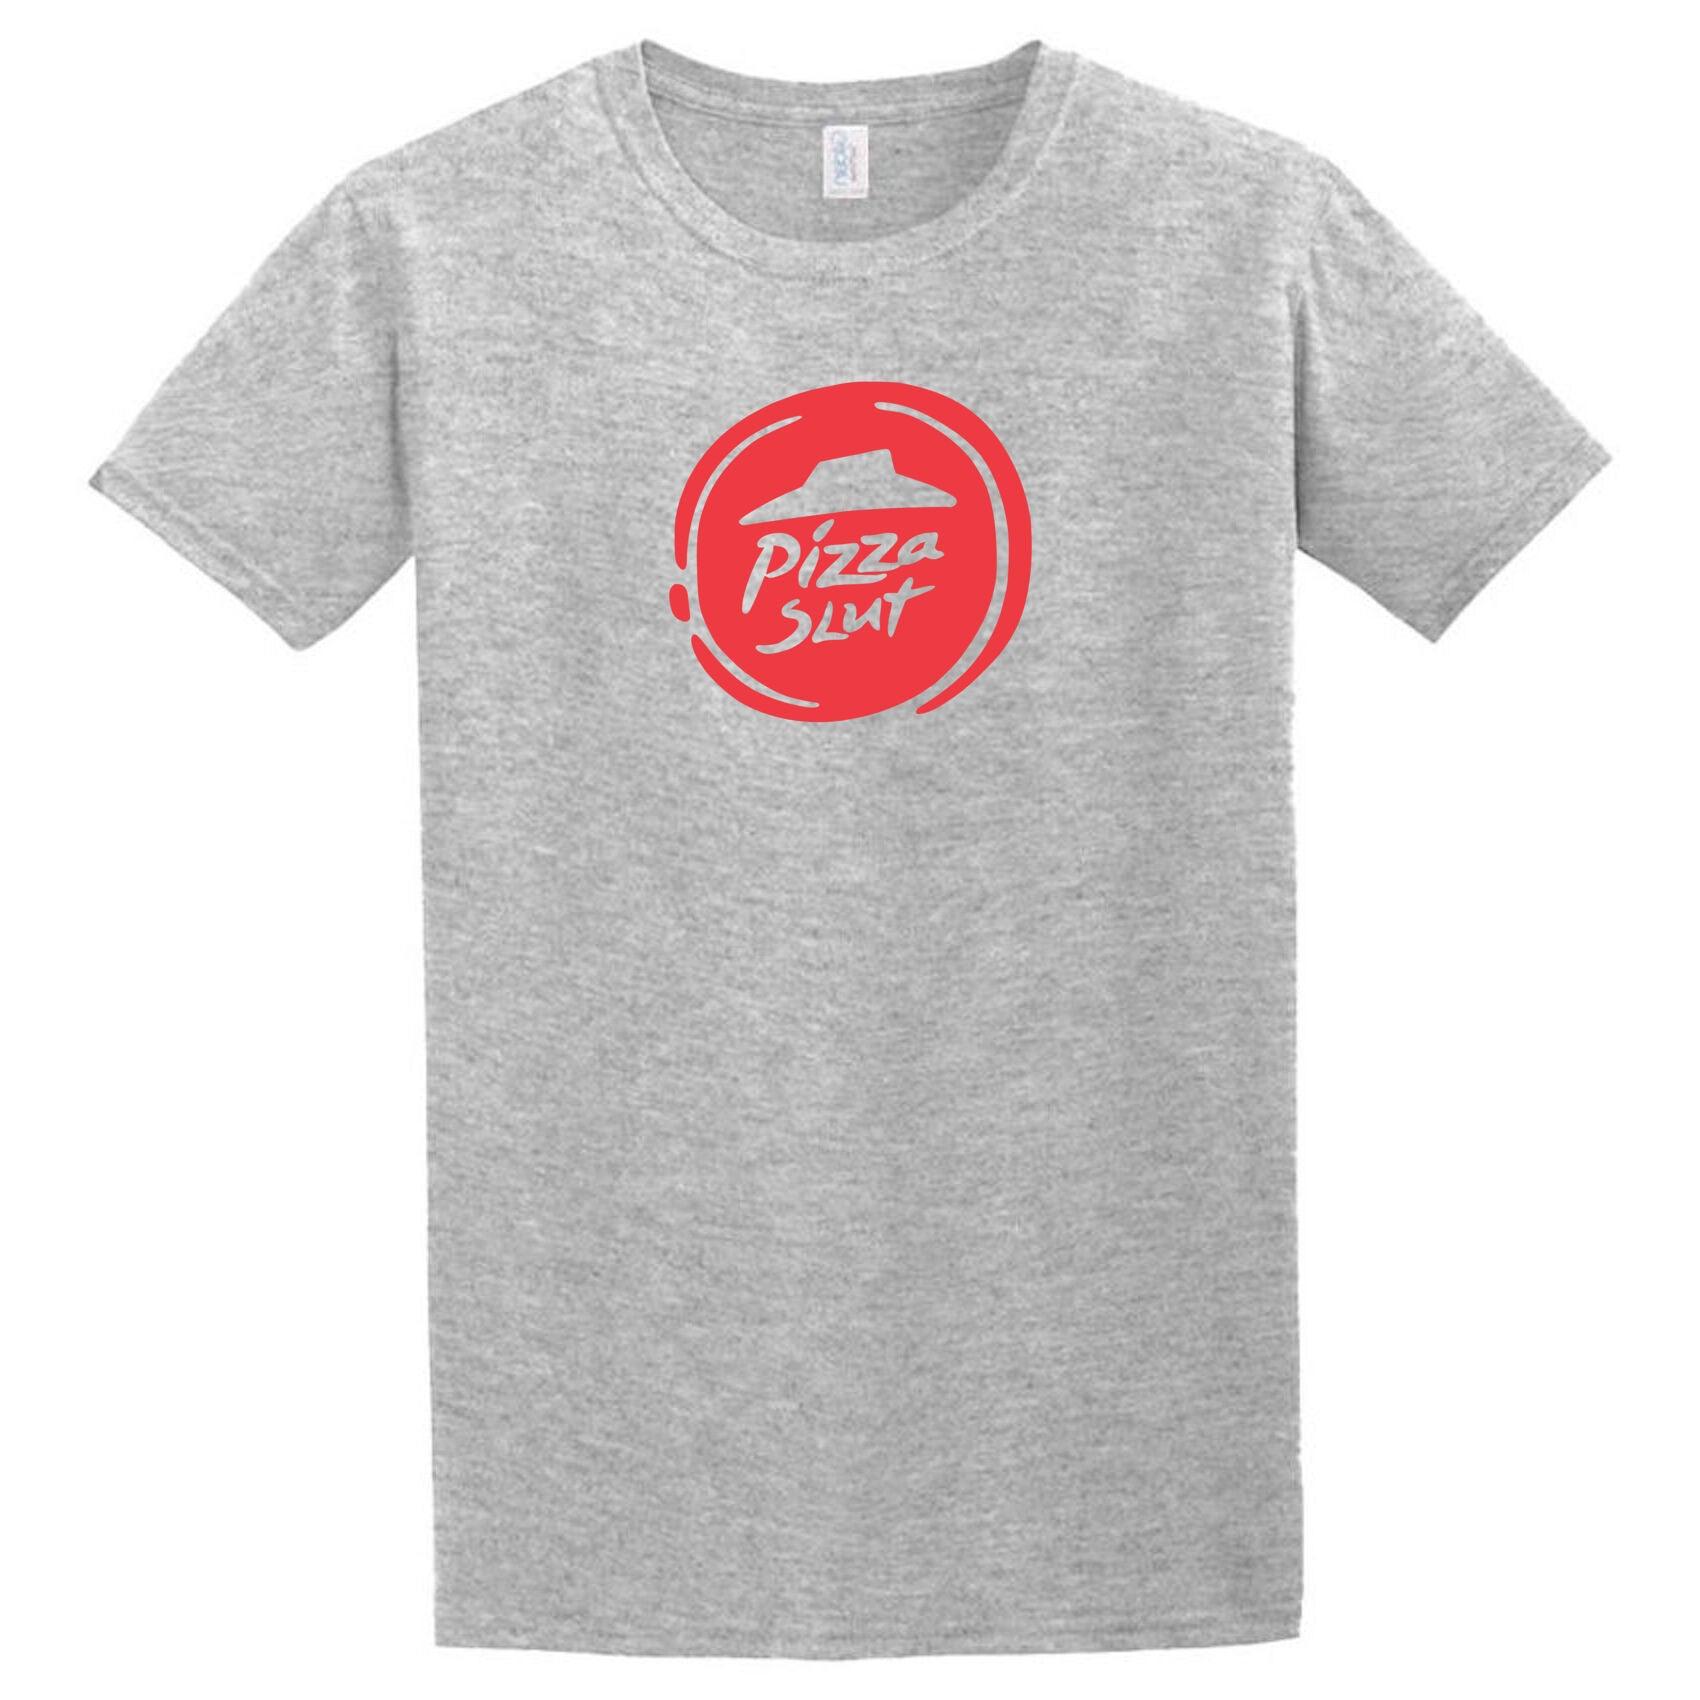 A gray Pizza Slut T-Shirt with a red Twisted Gifts logo on it.